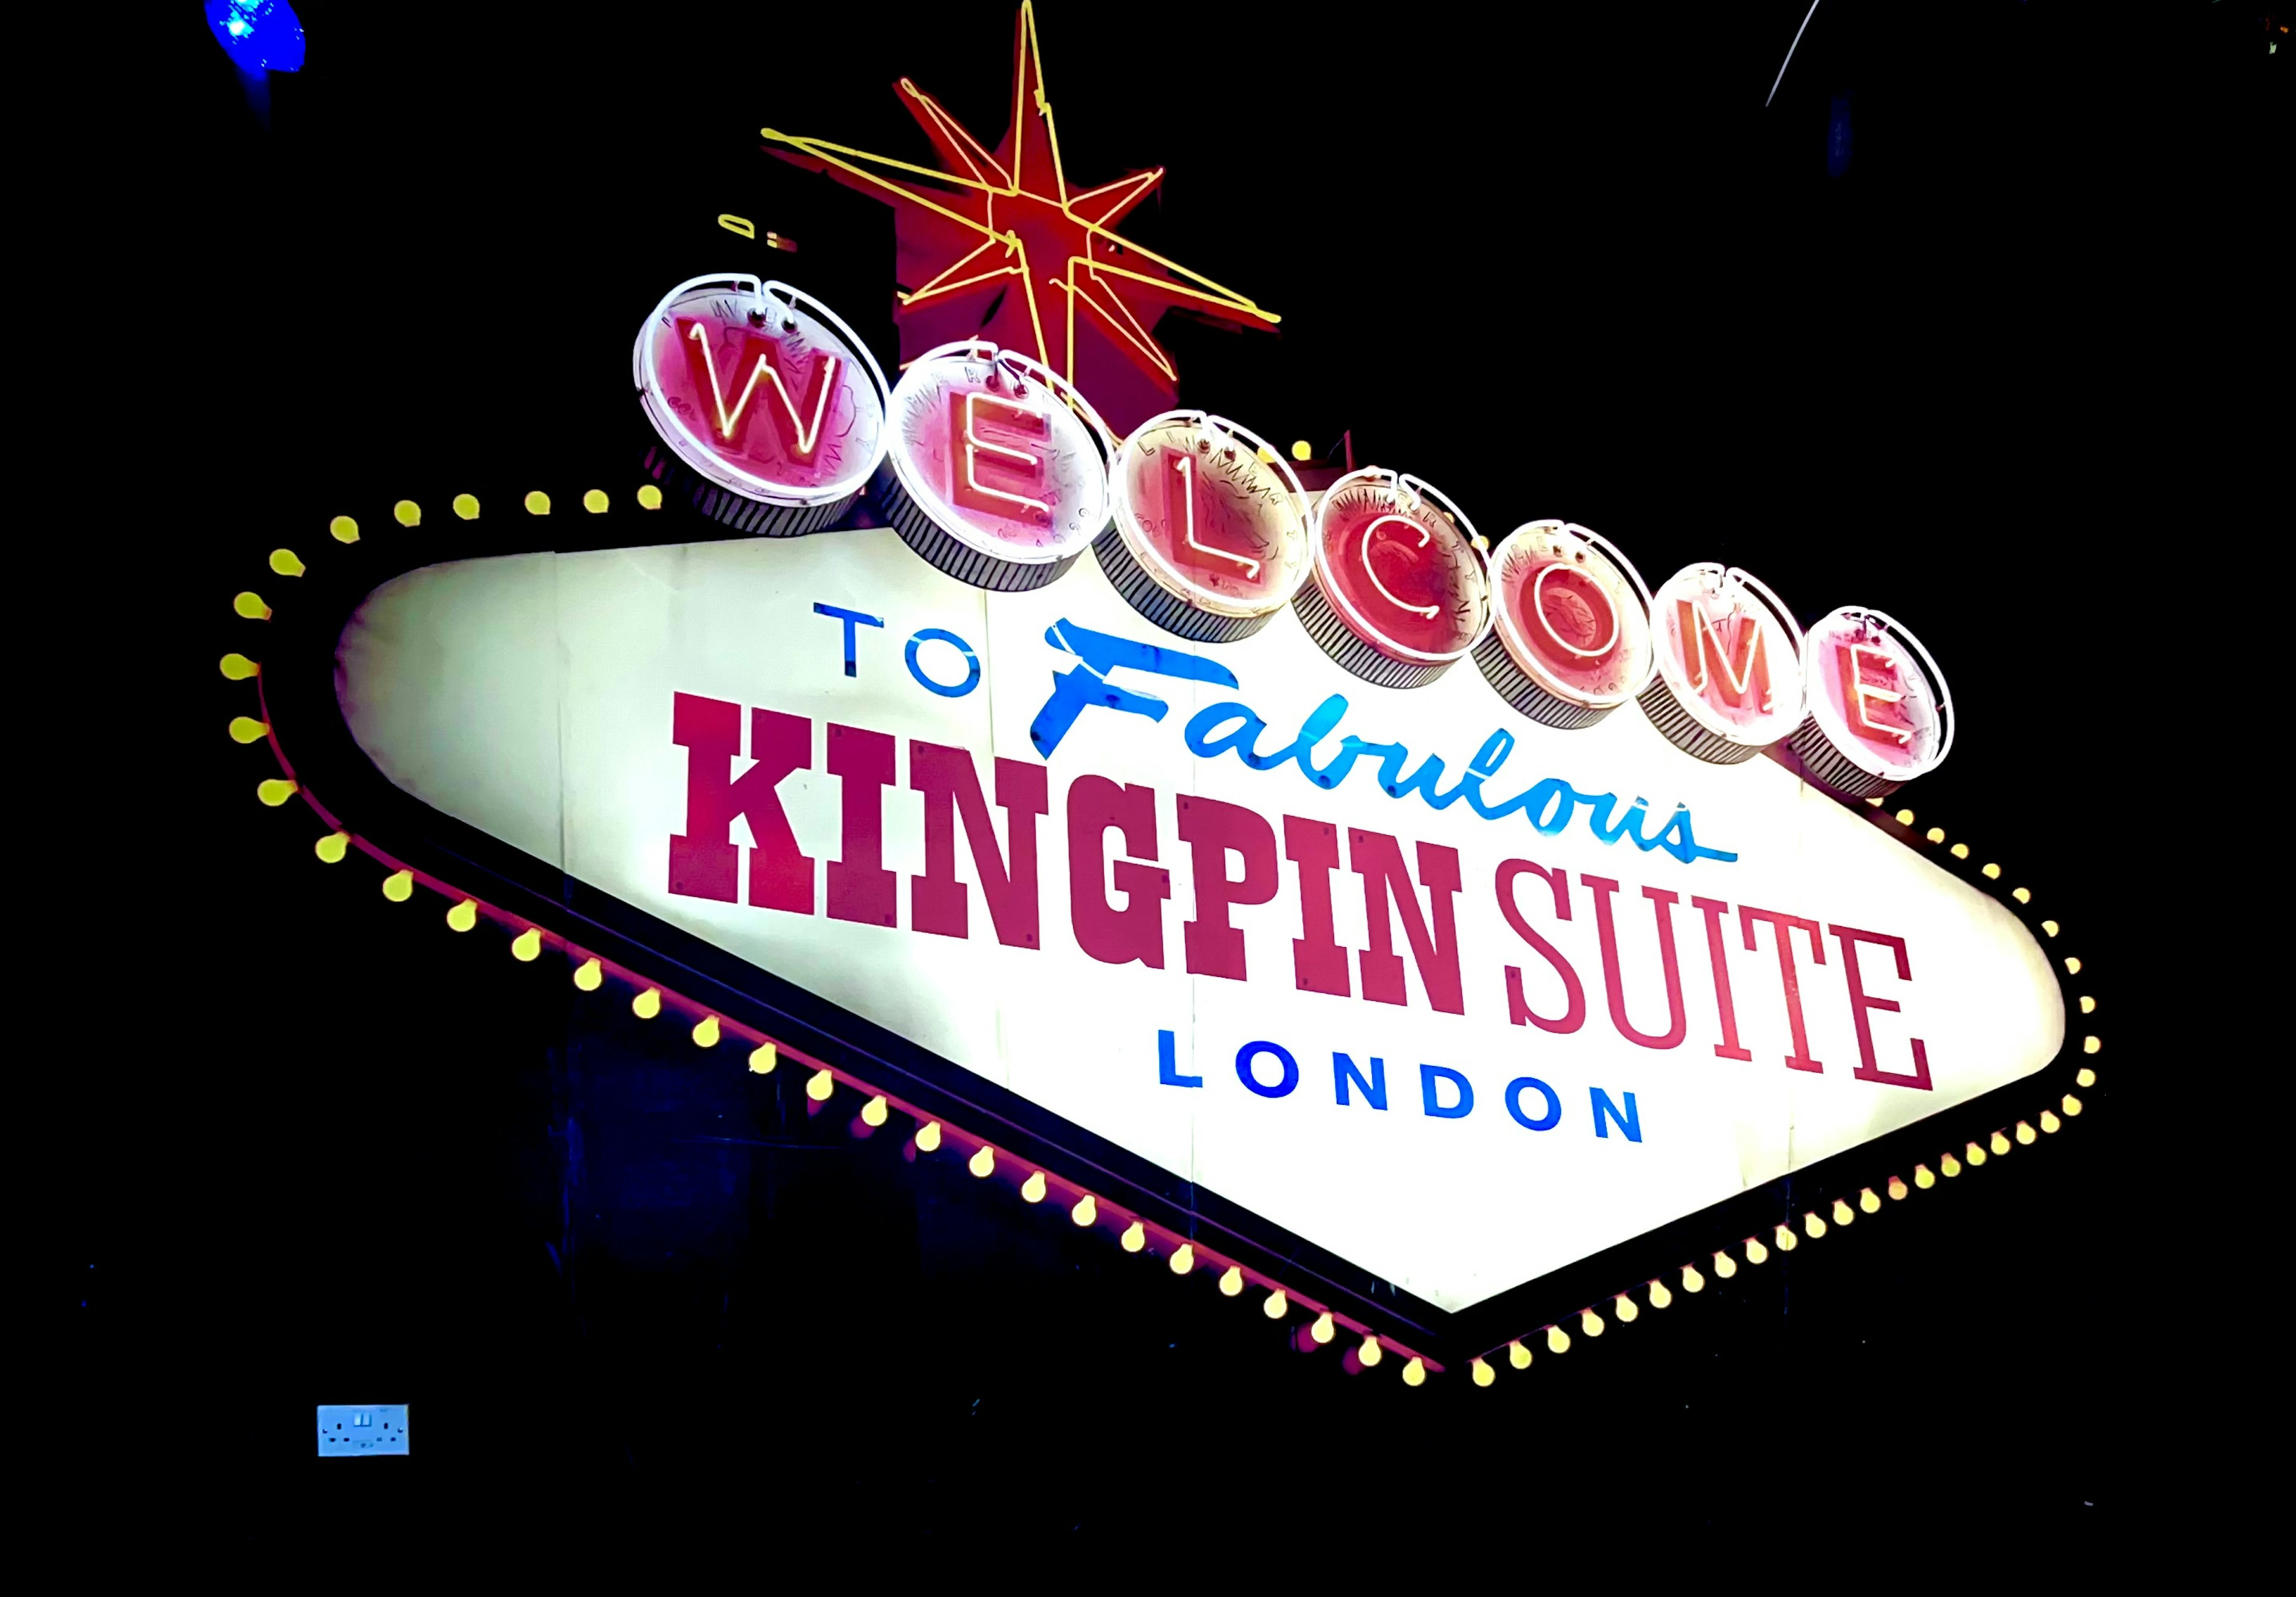 Business - Bloomsbury Bowling Lanes & The Kingpin Suite